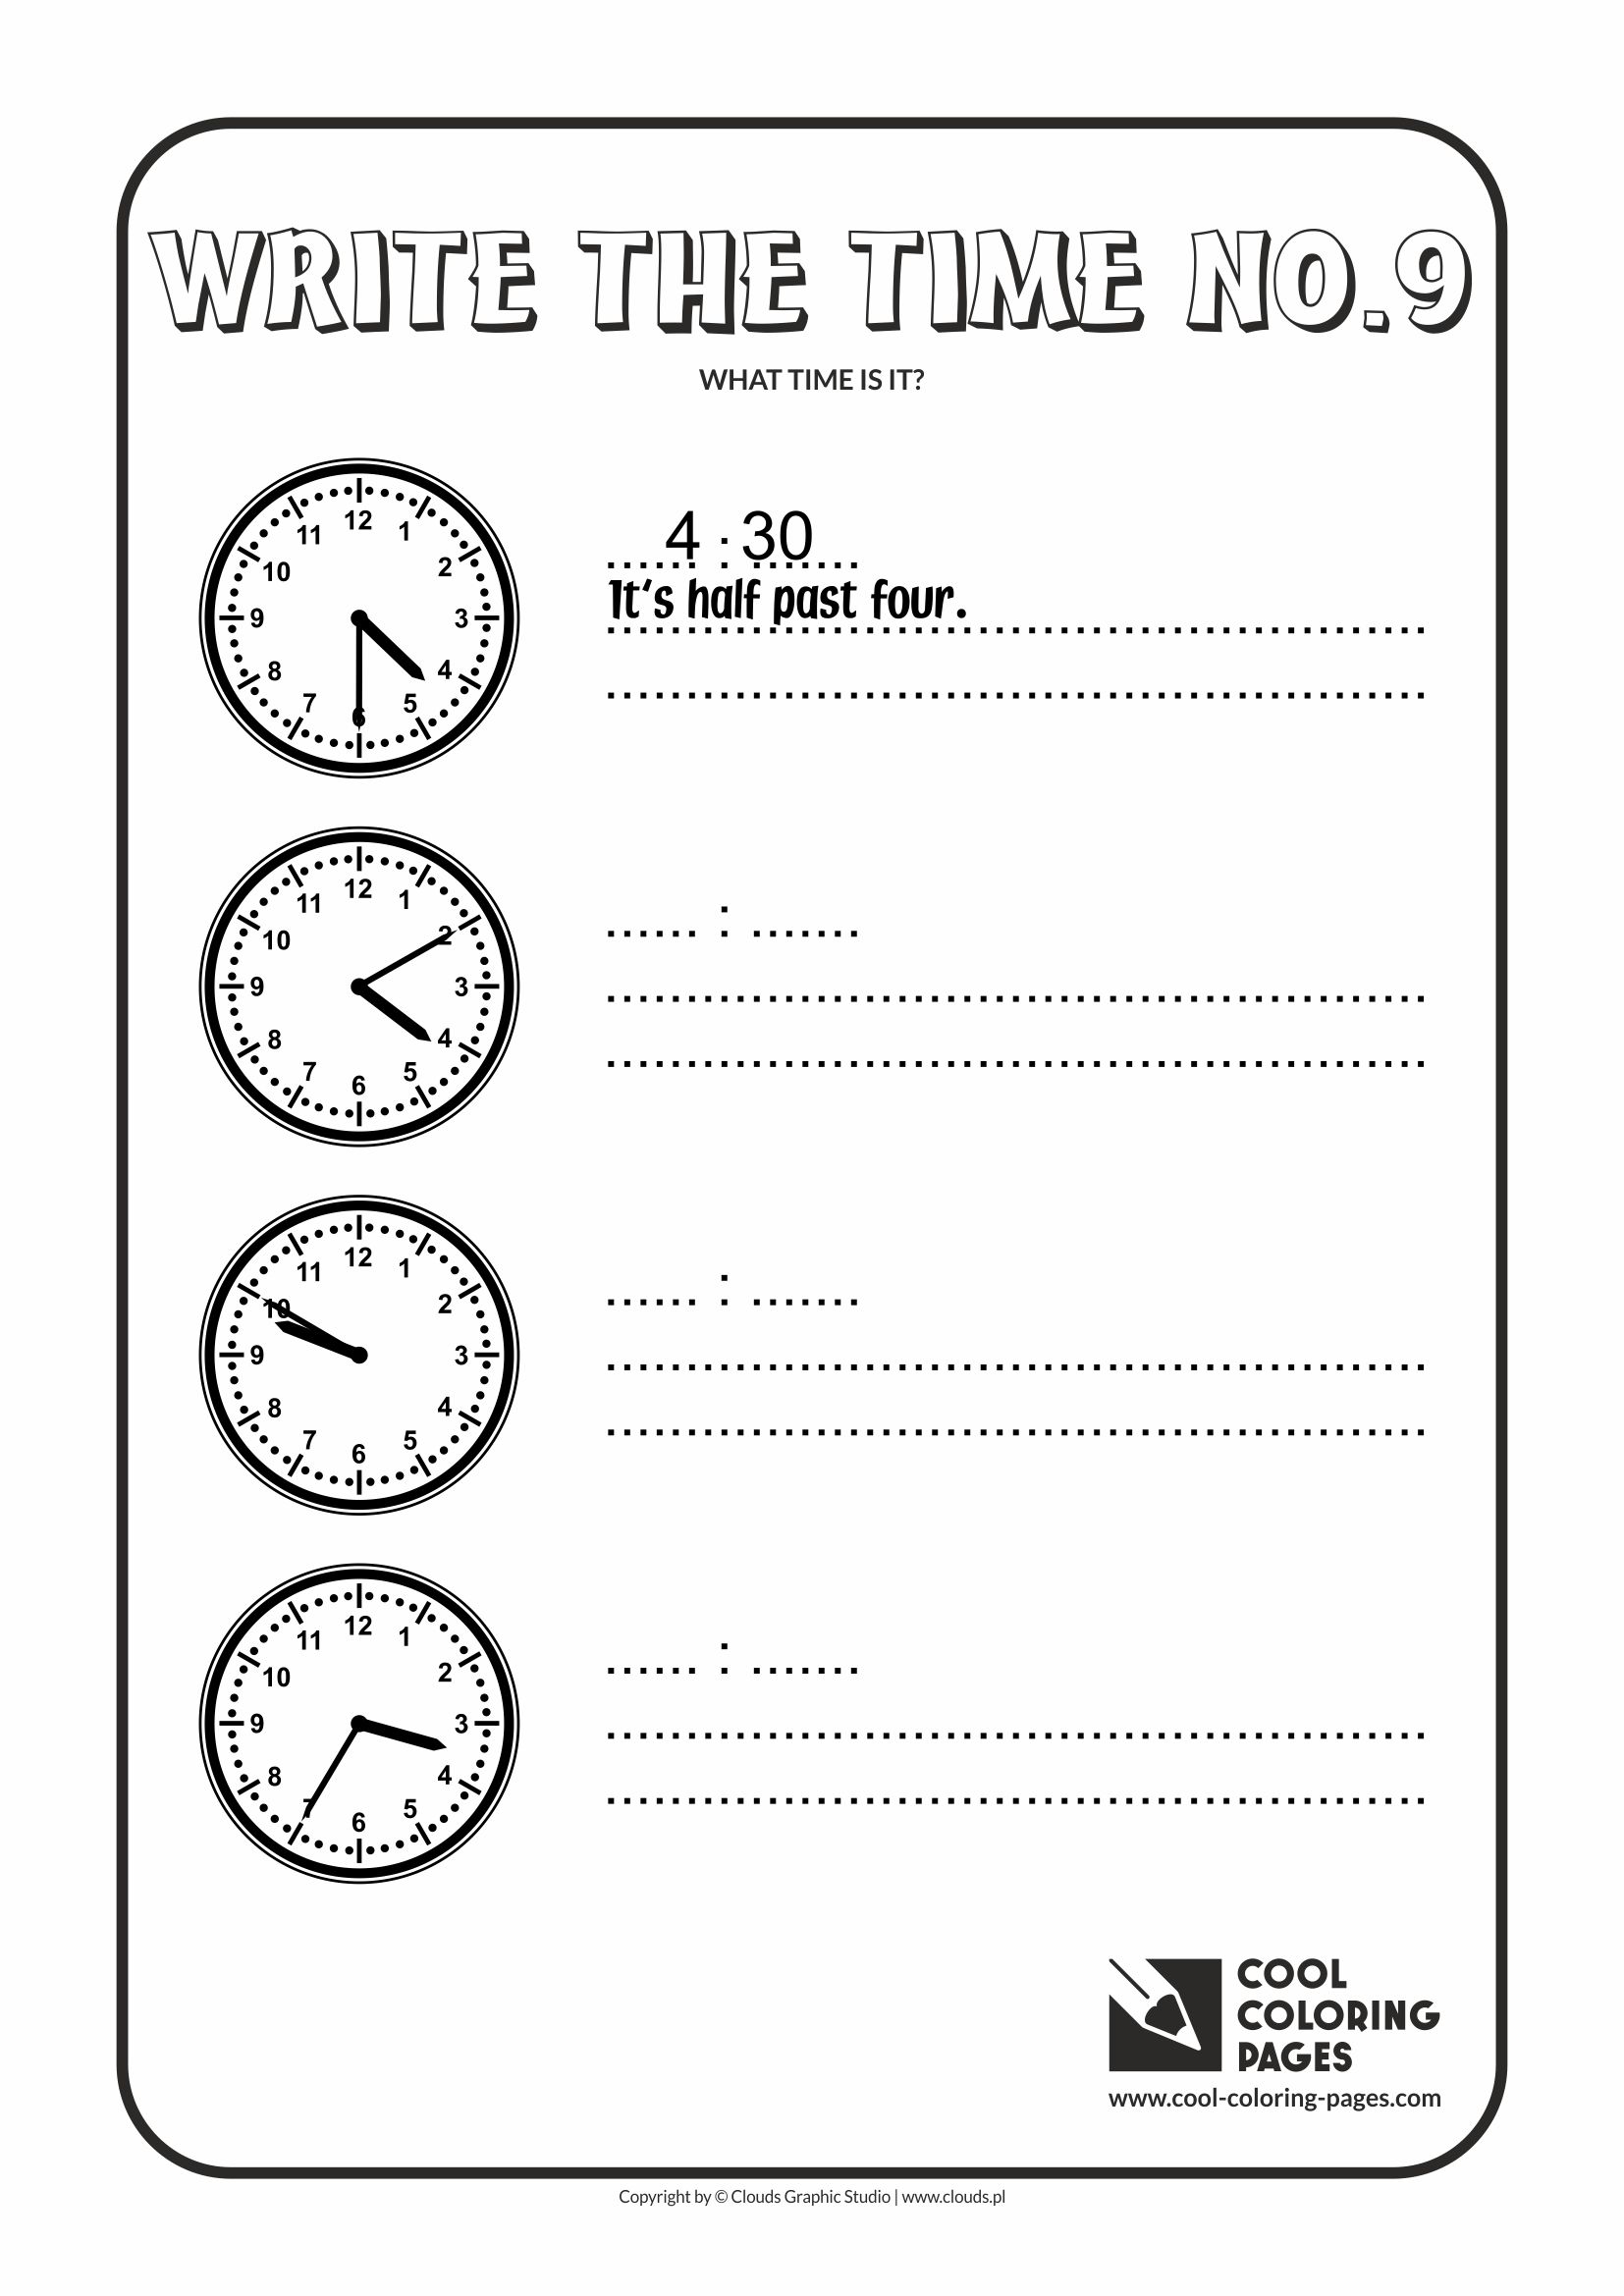 Cool Coloring Pages - Time / Write the time no.9